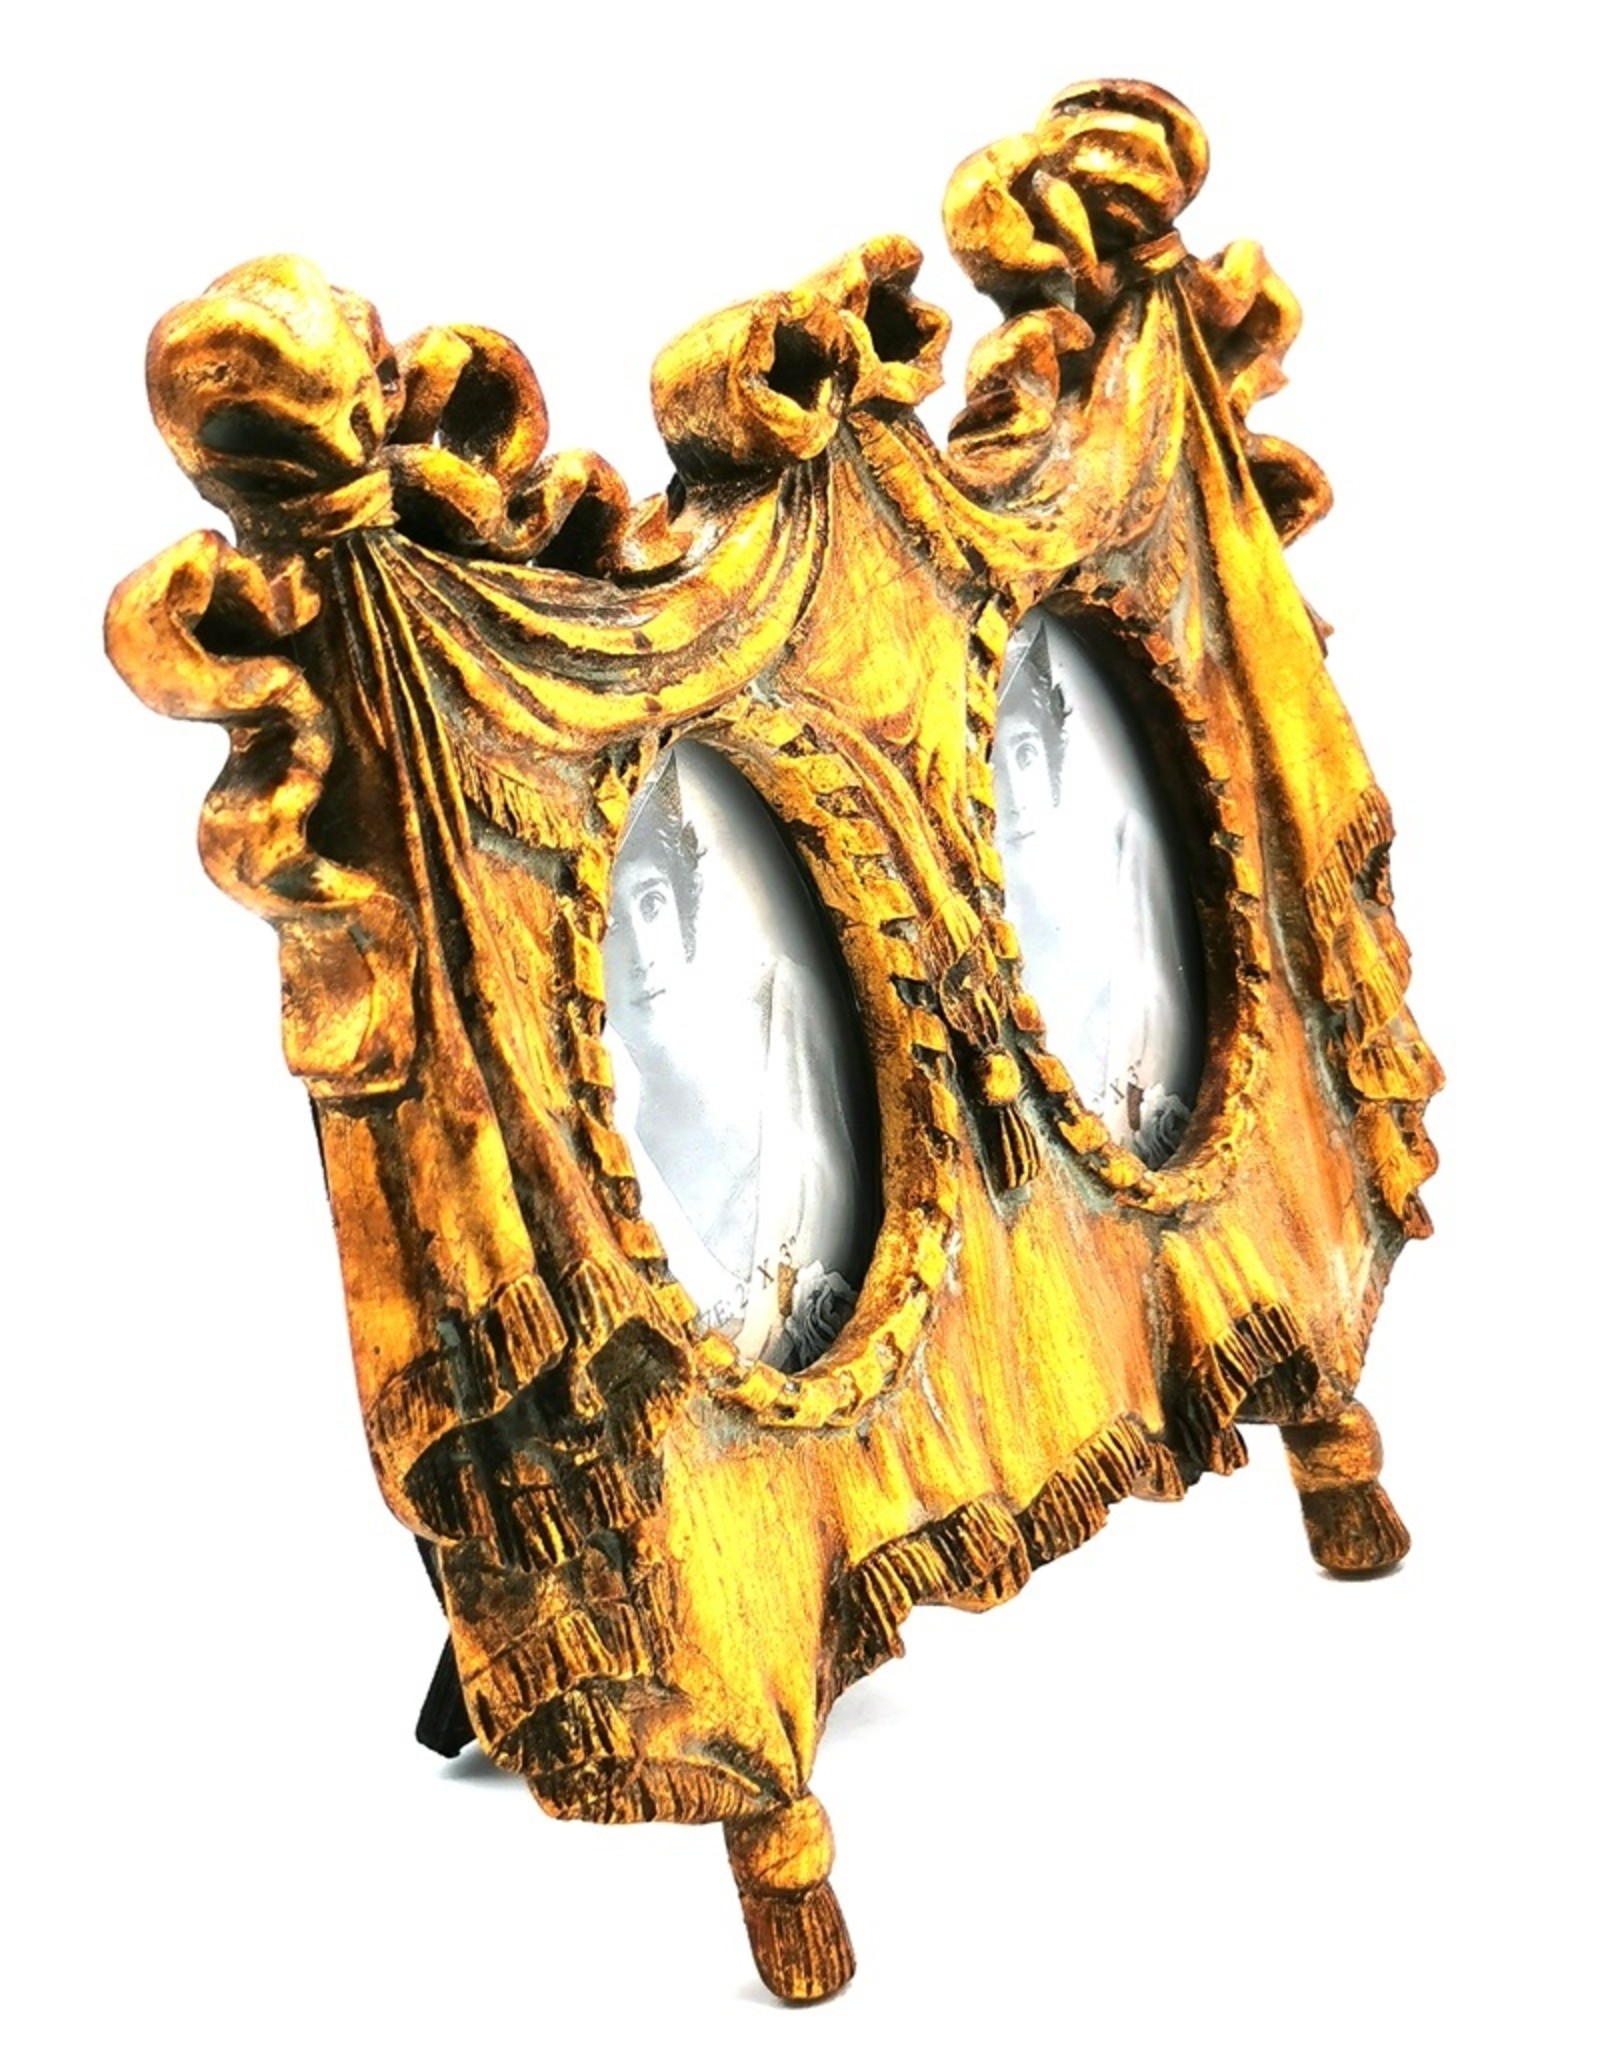 Trukado Miscellaneous - Double photo frame 1920s style gold colored